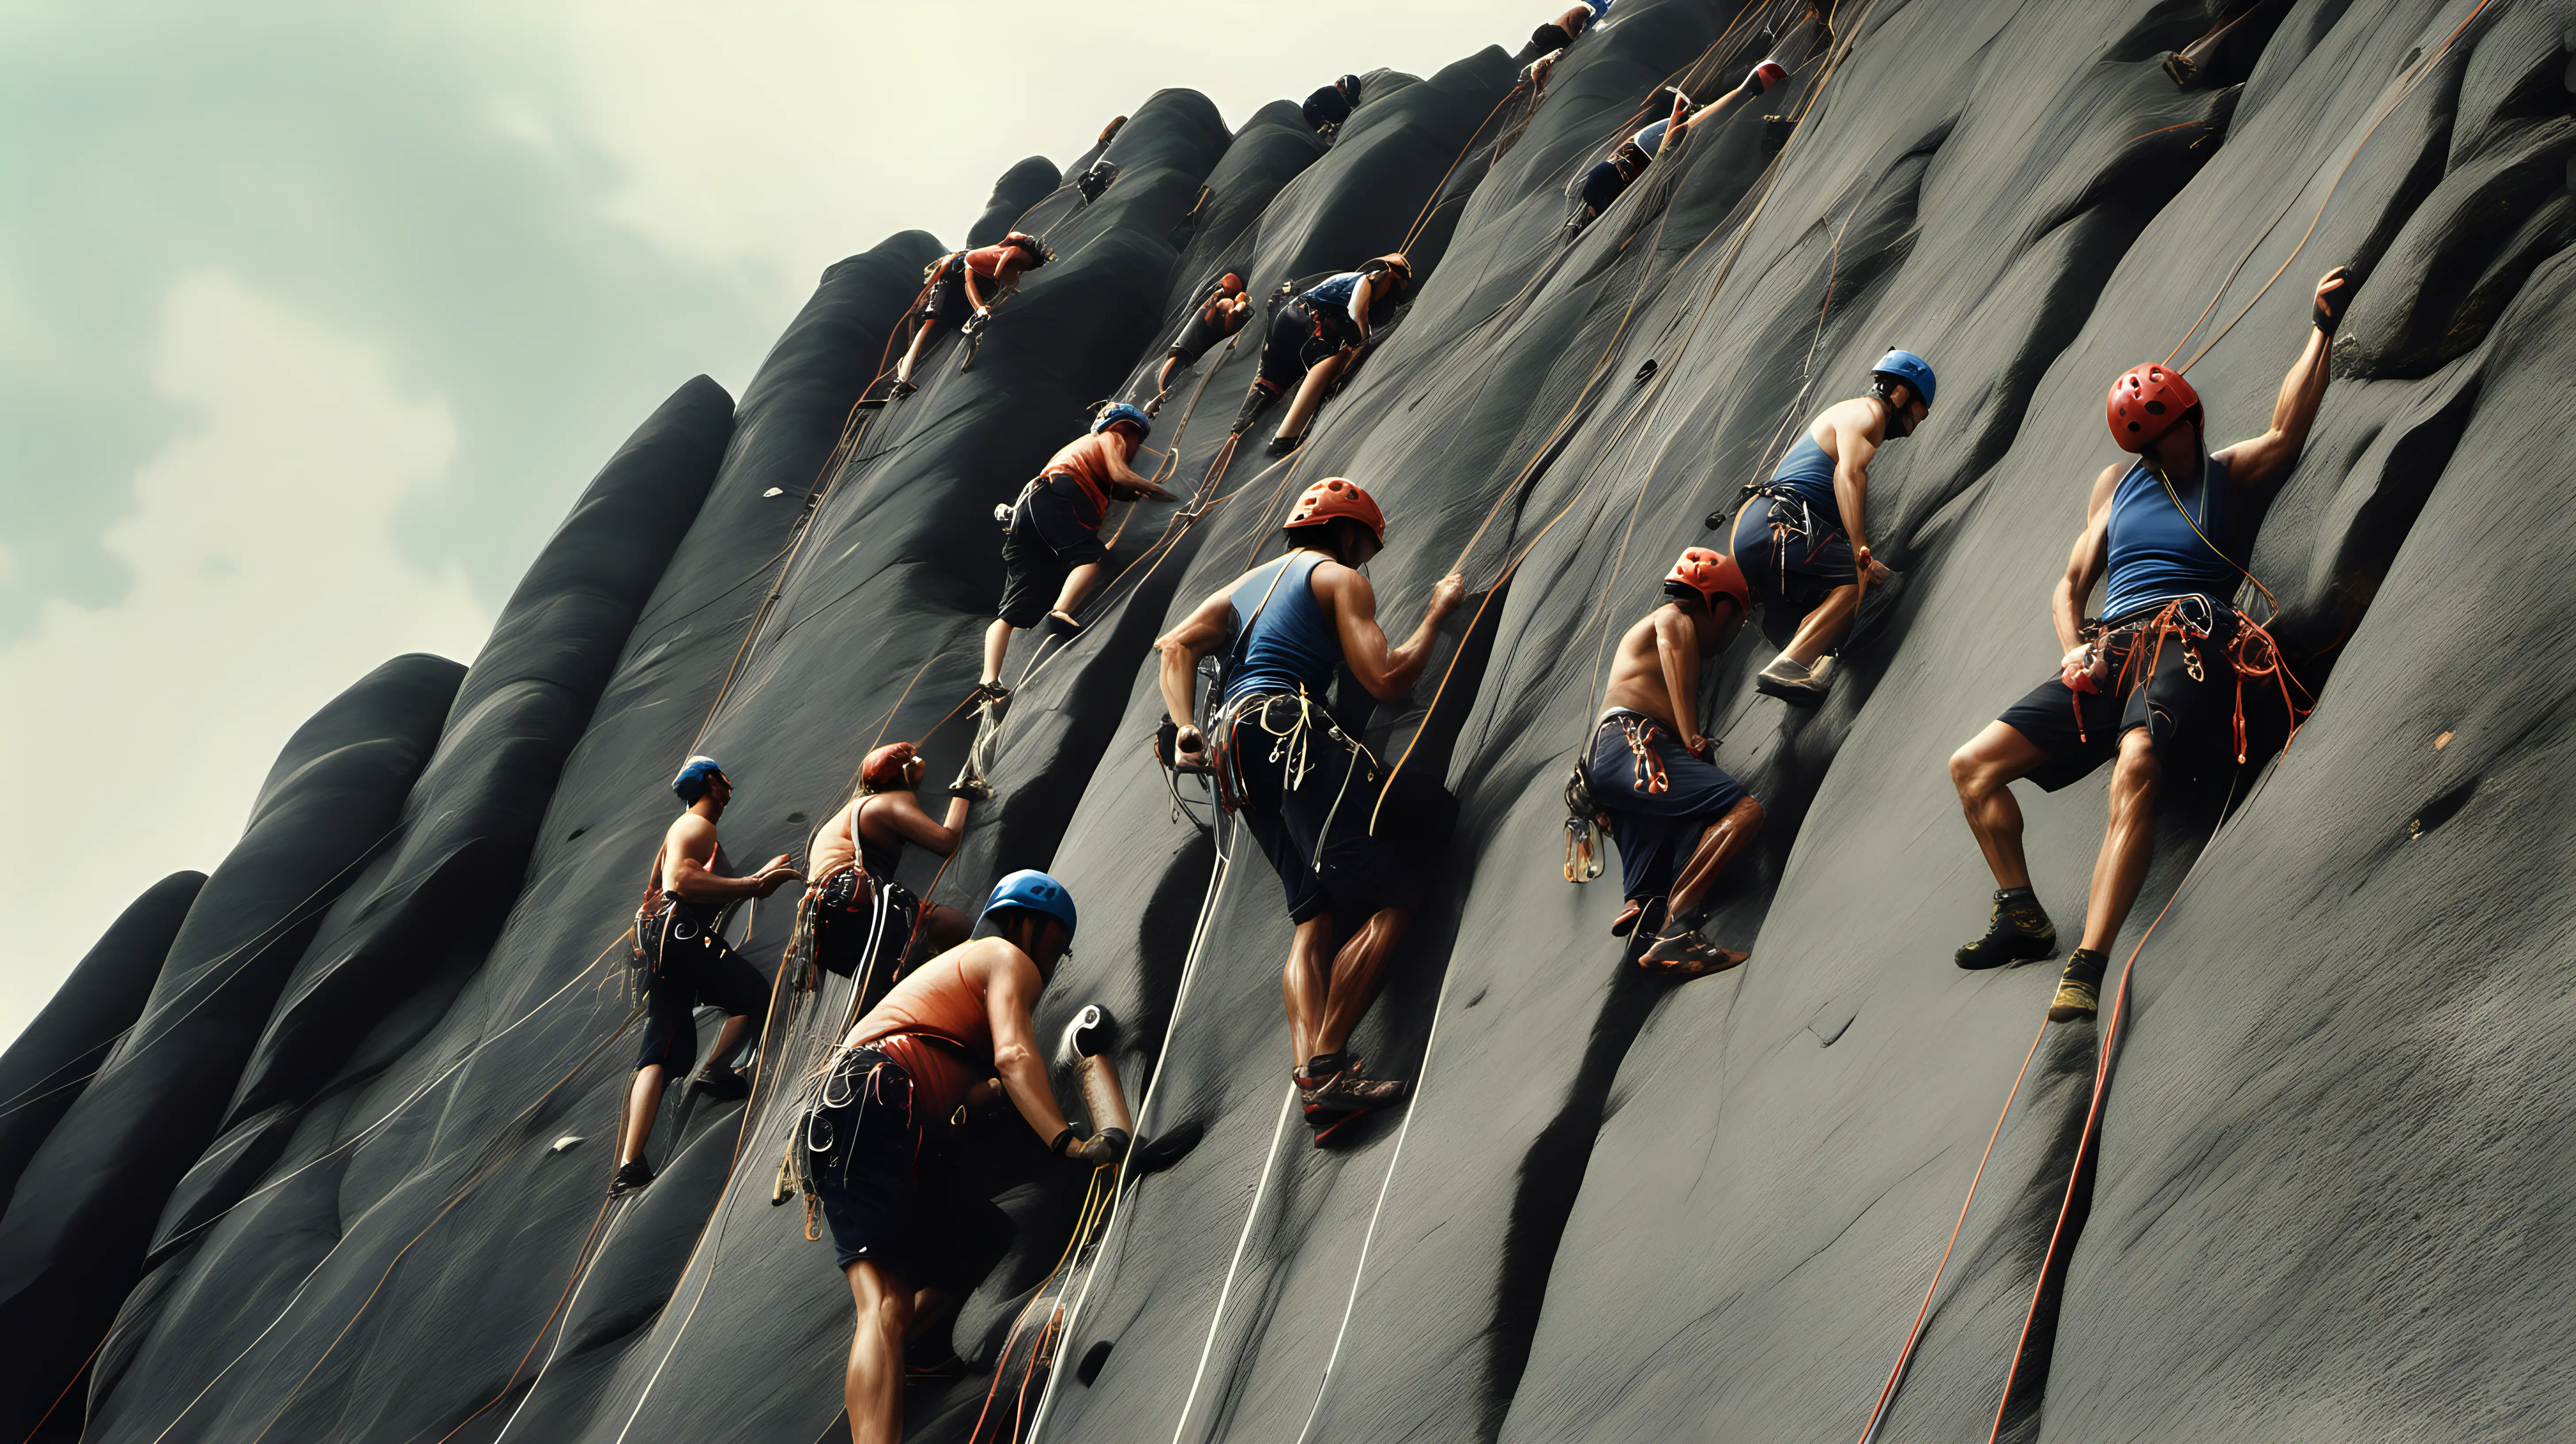 Determined Climbers Conquering Uphill Challenge with Visible Effort